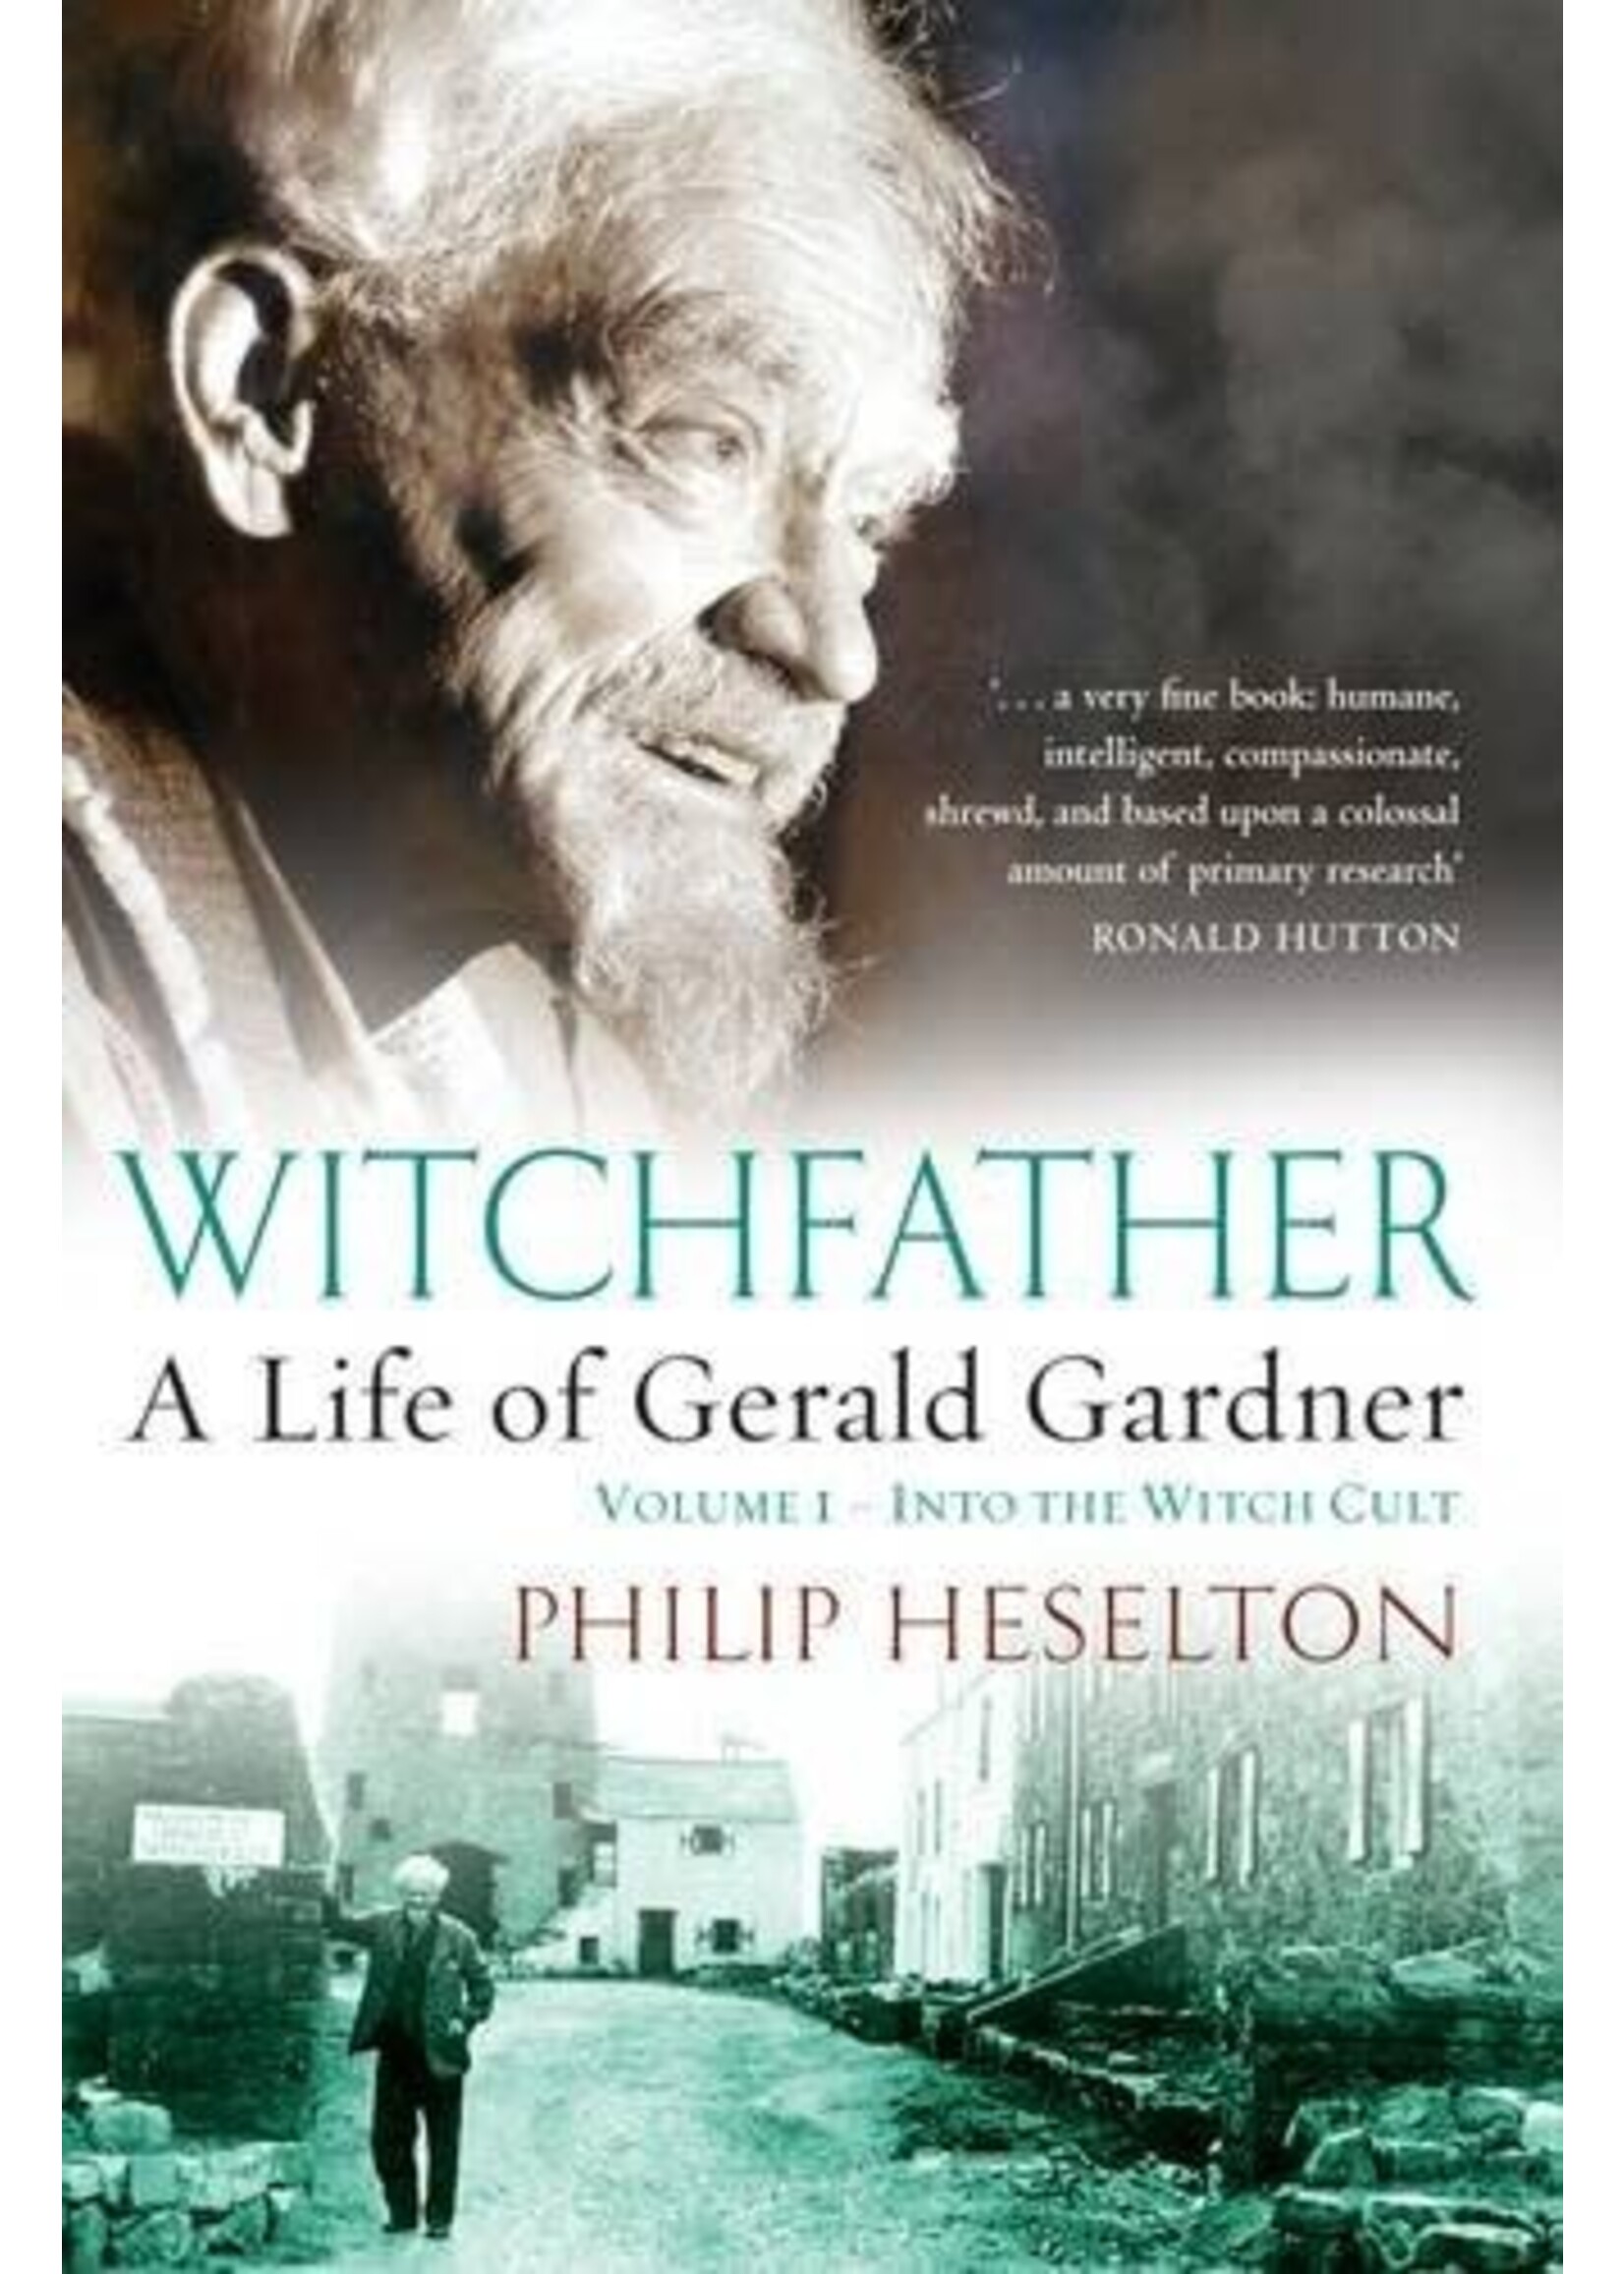 Witchfather: A Life of Gerald Gardner Vol. 1